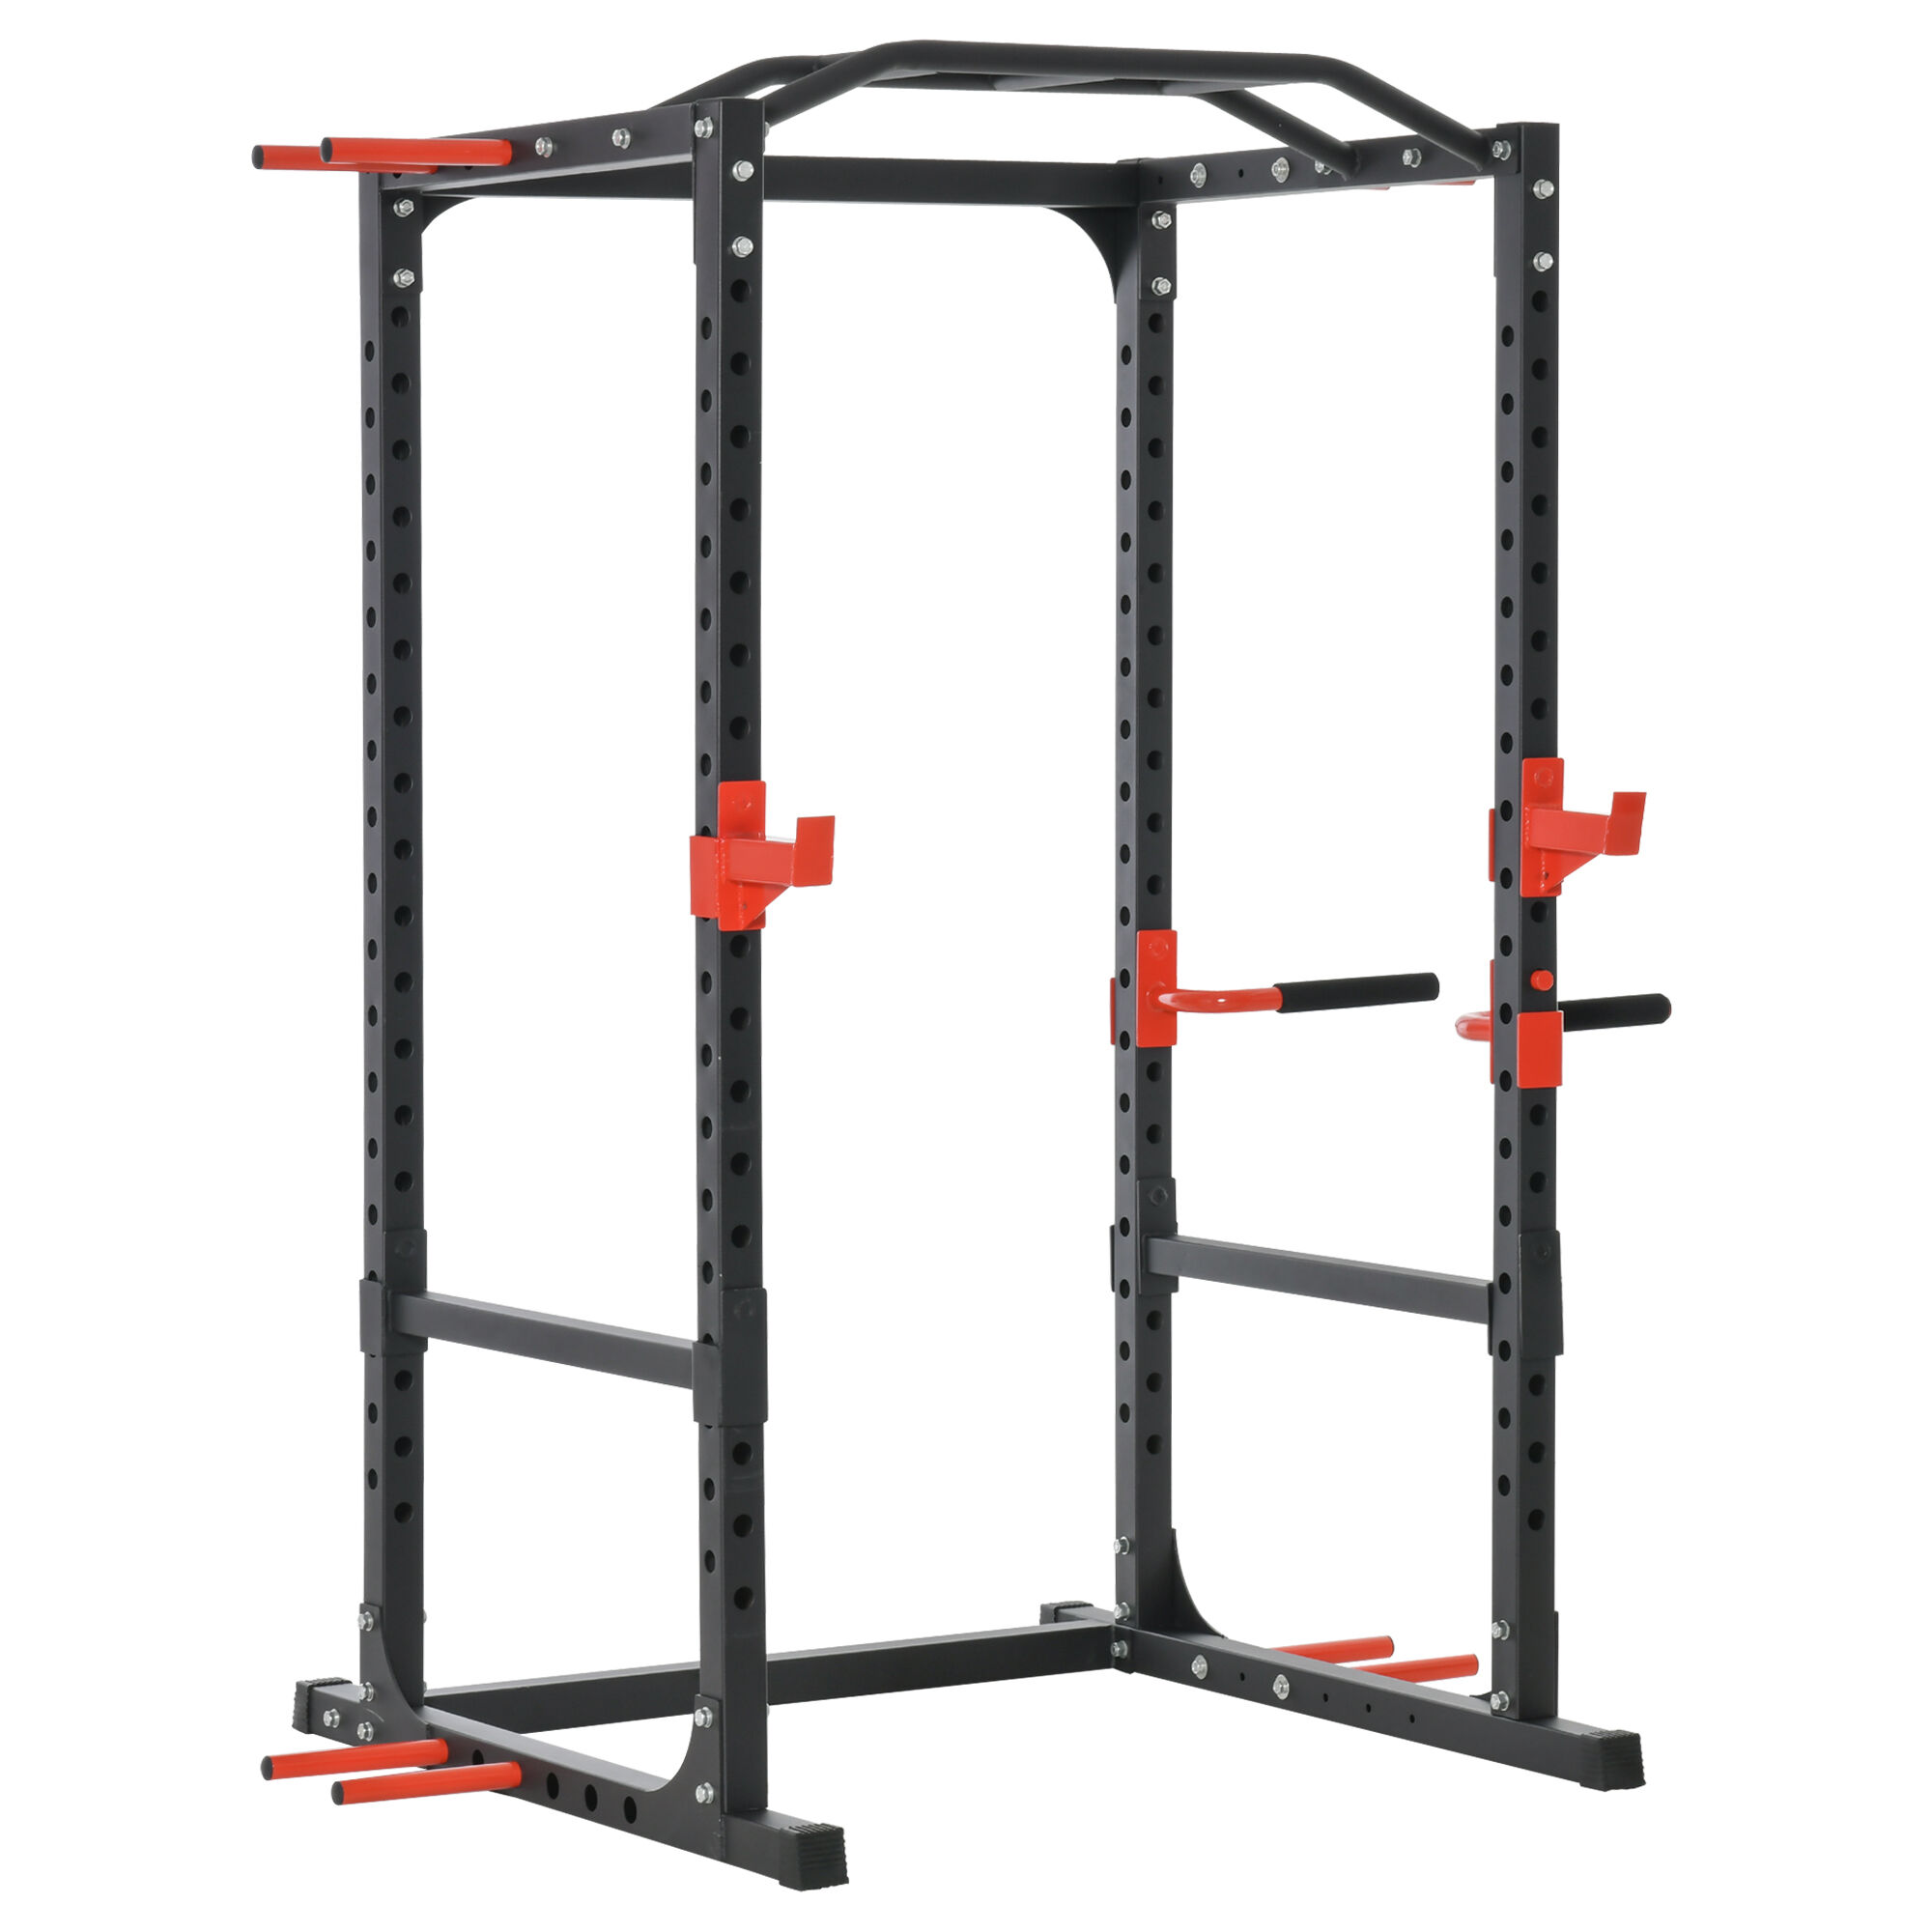 Soozier Power Tower Squat Cage, Adjustable Multi-Function Home Gym Weightlifting Exercise Workout Station, Black